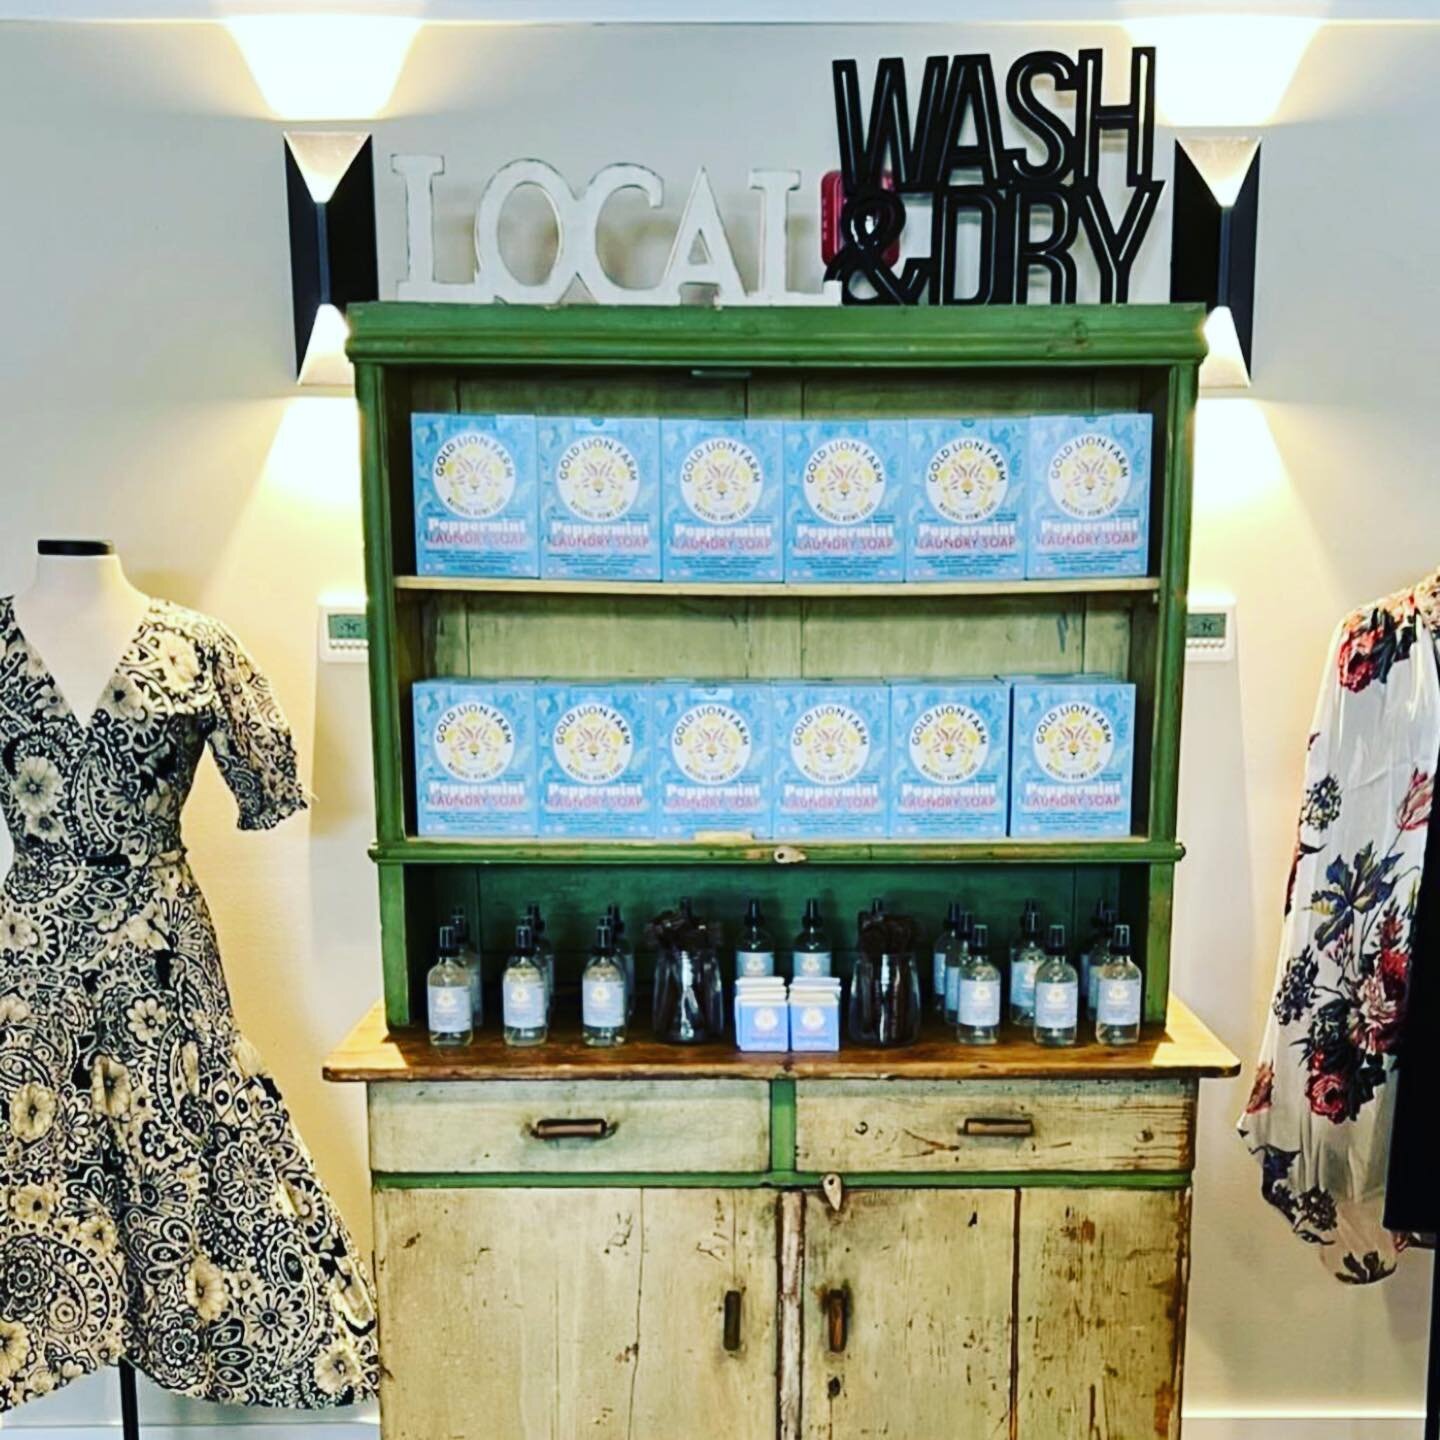 Our new retail customer @shoplenajane in Jackson, Ga has our entire collection of natural, good-for-you bath and laundry products made right here in Jackson! We are so excited about their Grand Opening! 

#CityOfJackson #Retail #ShopLenaJane #Georgia